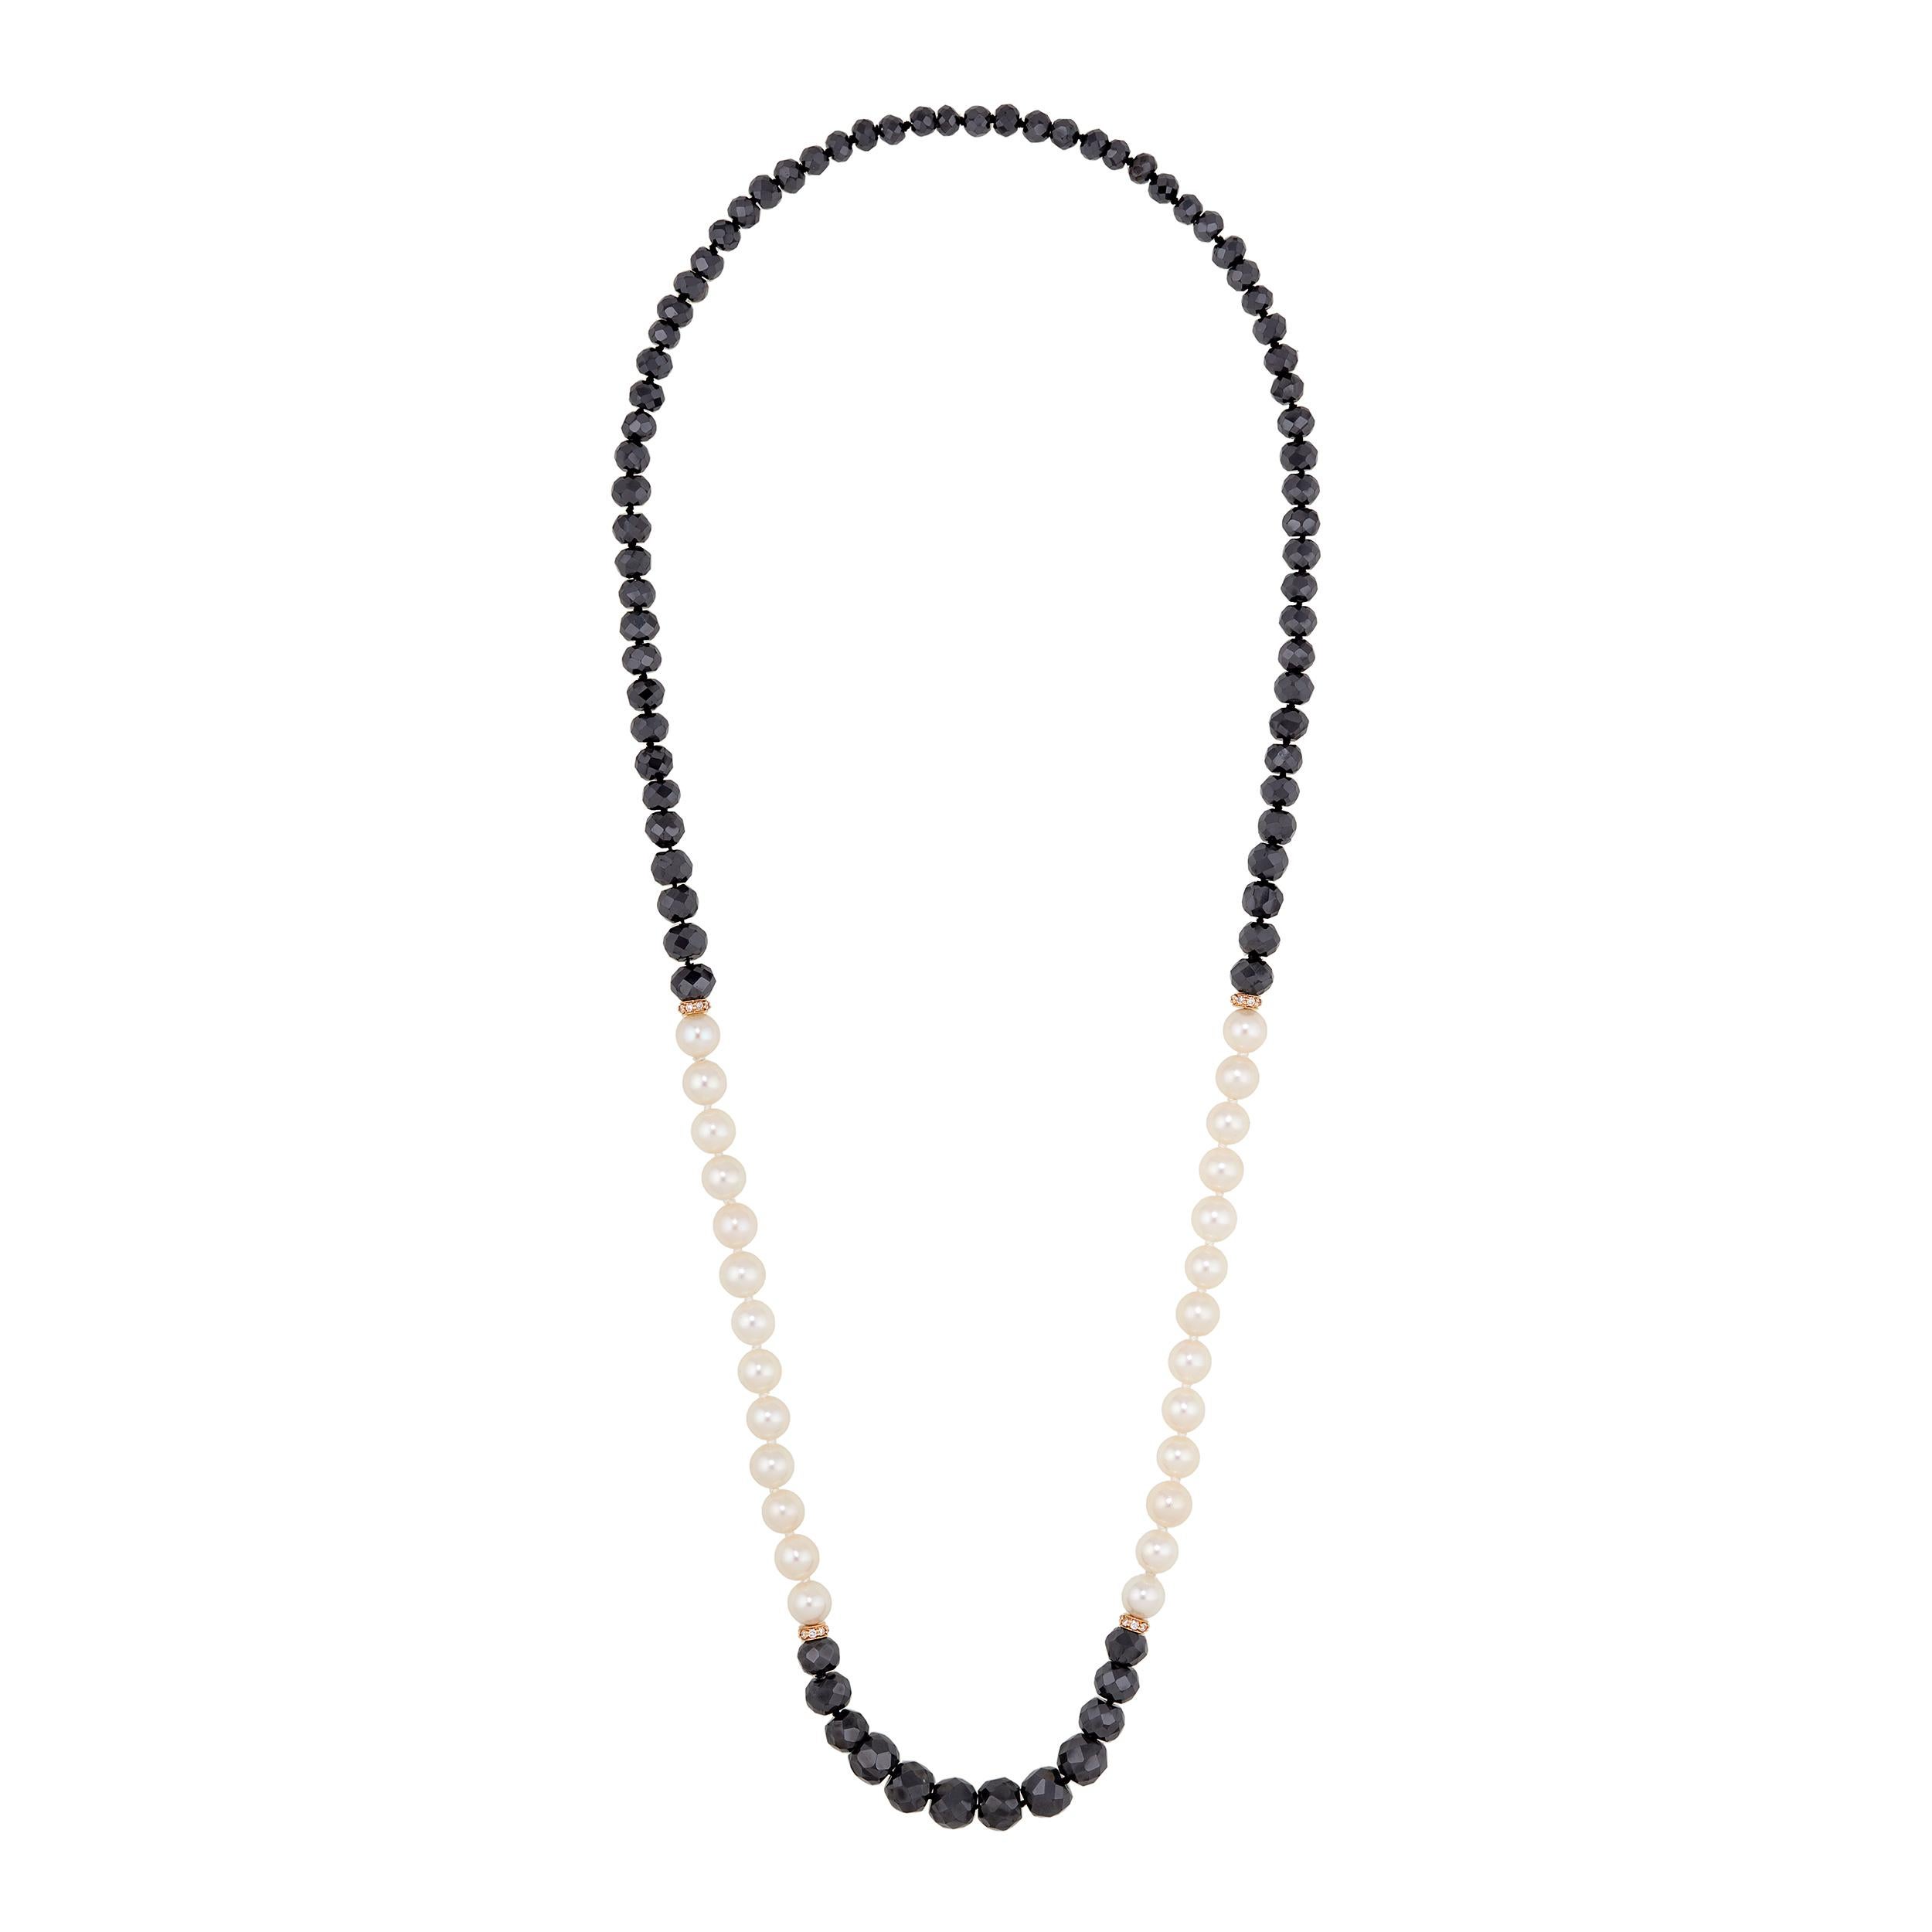 Very high quality AAA Cultured Saltwater Pearls strung alongside faceted Black Diamonds.  The sections are punctuated by 18 Karat Yellow Gold and Diamond spacers.  This necklace is designed as a Mala necklace.  A Buddha bead and tassel can be added